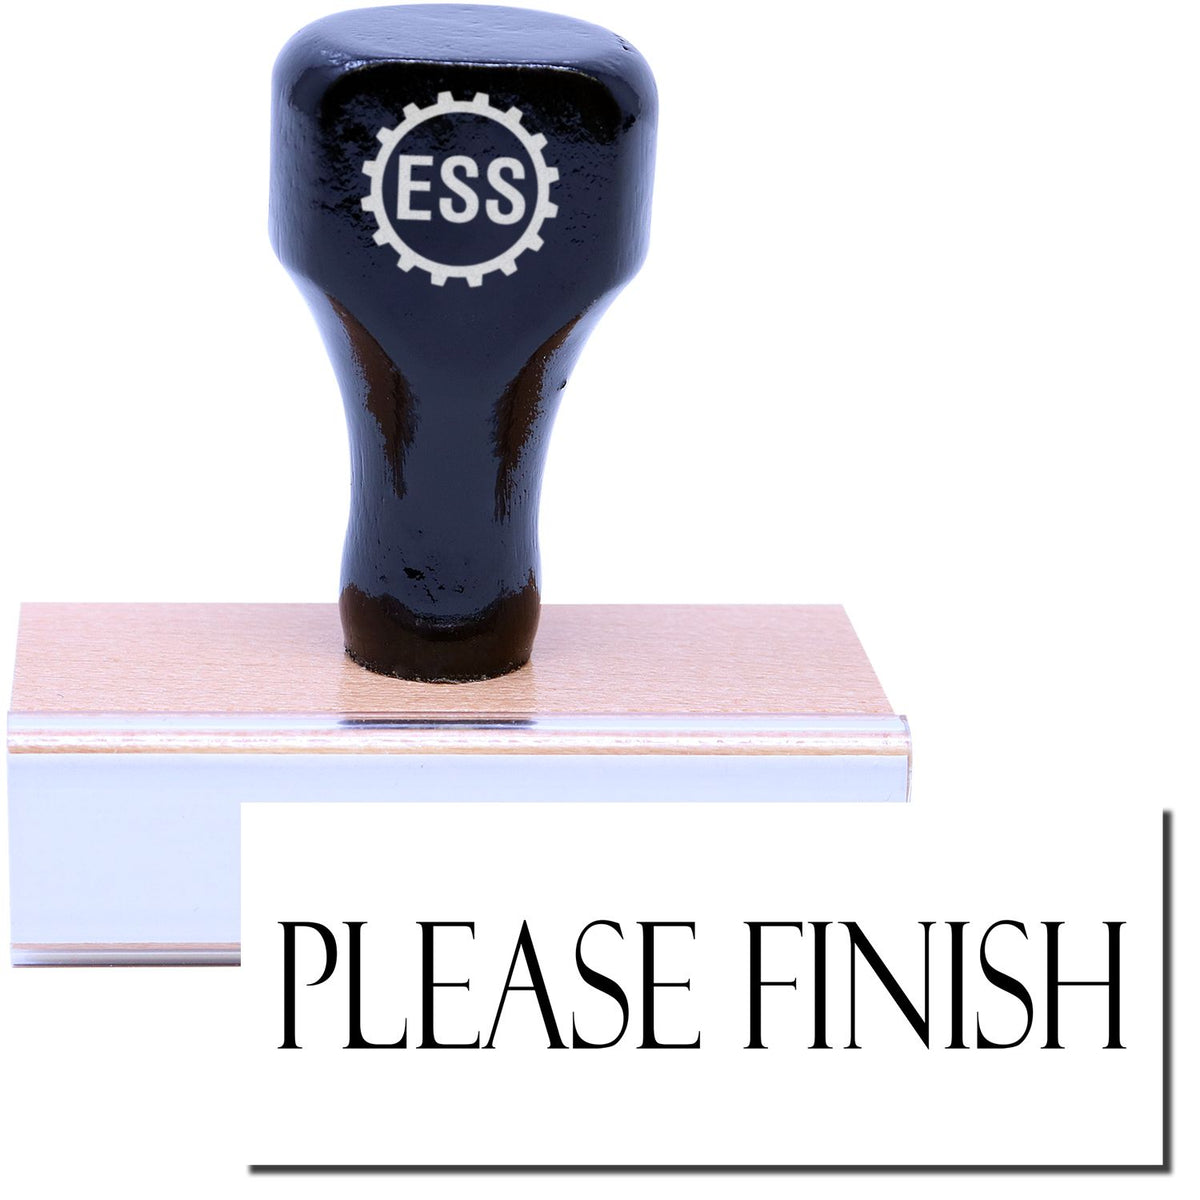 A stock office rubber stamp with a stamped image showing how the text &quot;PLEASE FINISH&quot; in a large font is displayed after stamping.